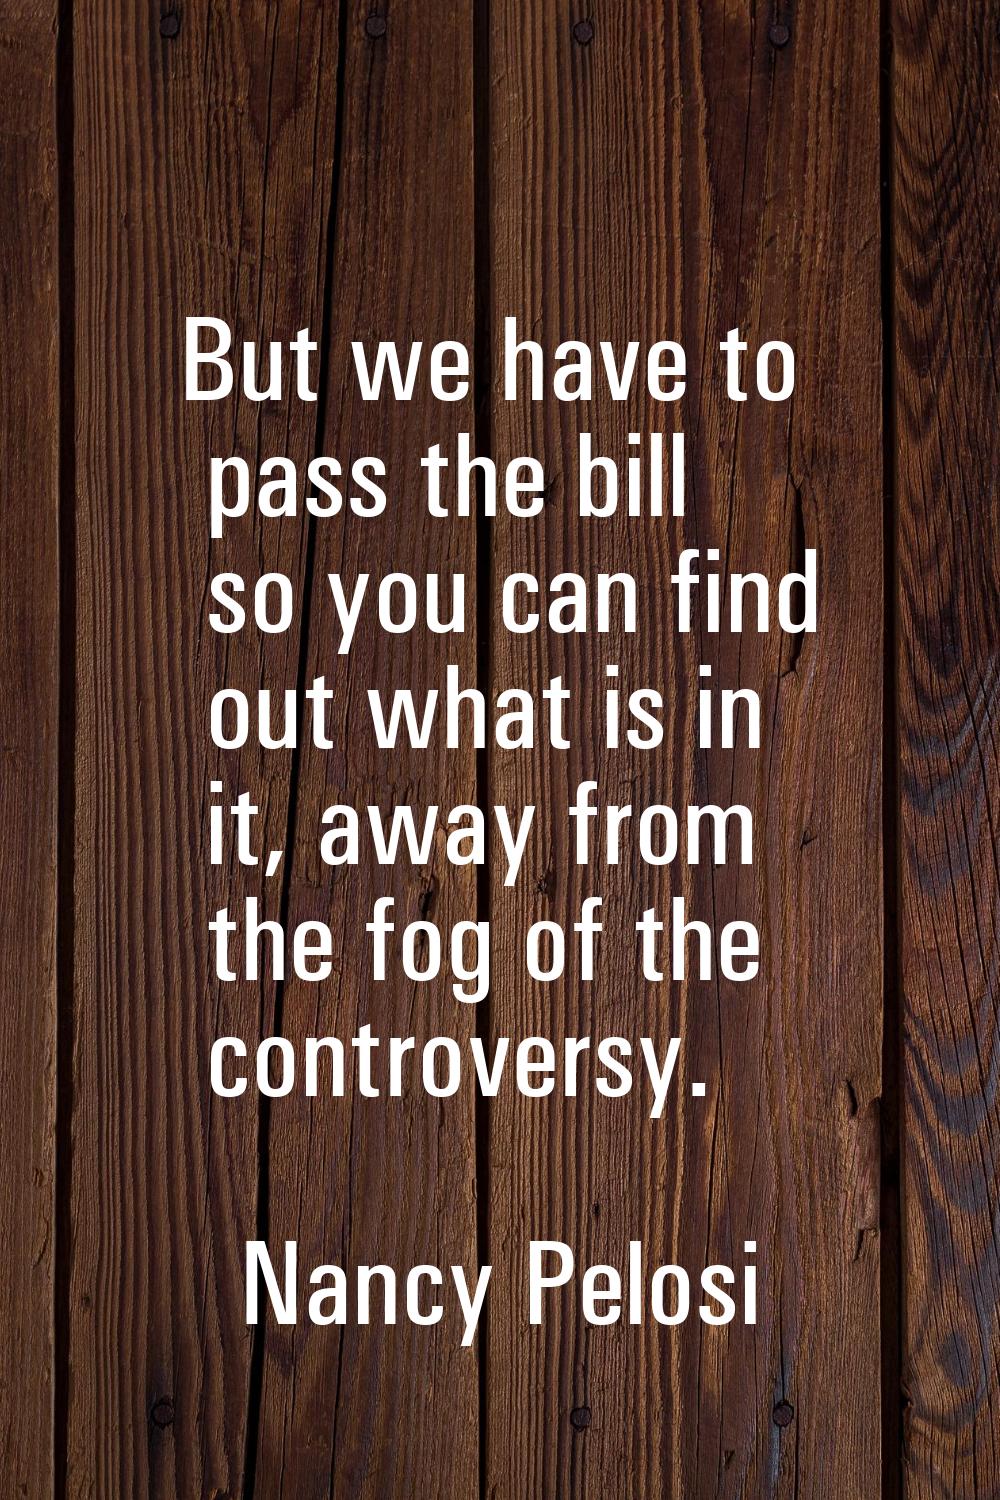 But we have to pass the bill so you can find out what is in it, away from the fog of the controvers